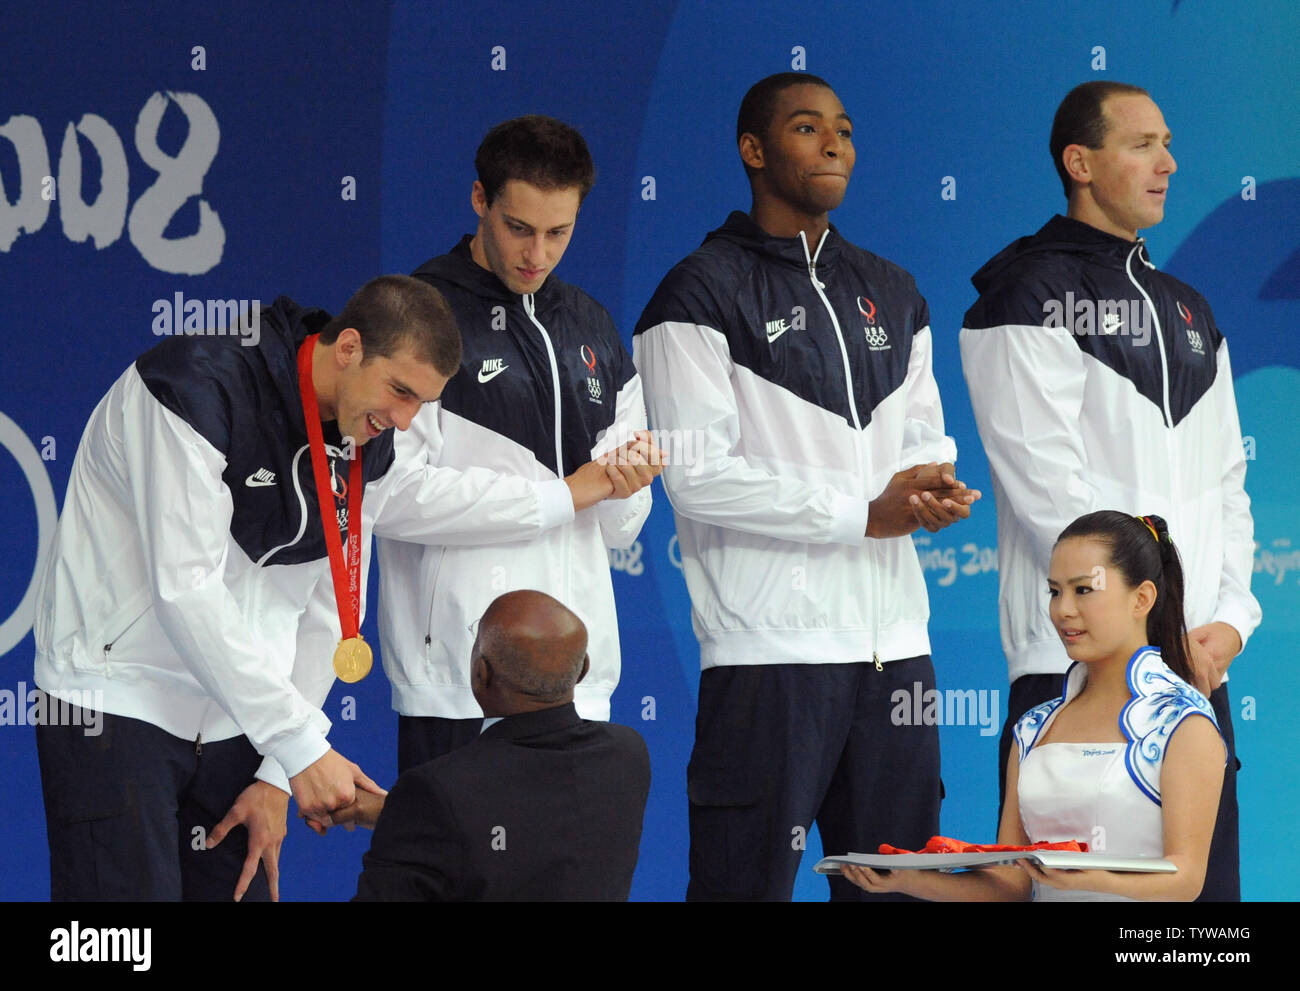 USA's Michael Phelps receives his second gold medal of the Olympics as his Men's 4x100M Relay team members, Garret Weber-Gale, Cullen Jones and Jason Lezak look on during the awards ceremonies at the National Aquatics Center at the Summer Olympics in Beijing on August 11, 2008.  The United States team won the gold in a World Record time of 3:08.24.    (UPI Photo/Pat Benic)l Stock Photo